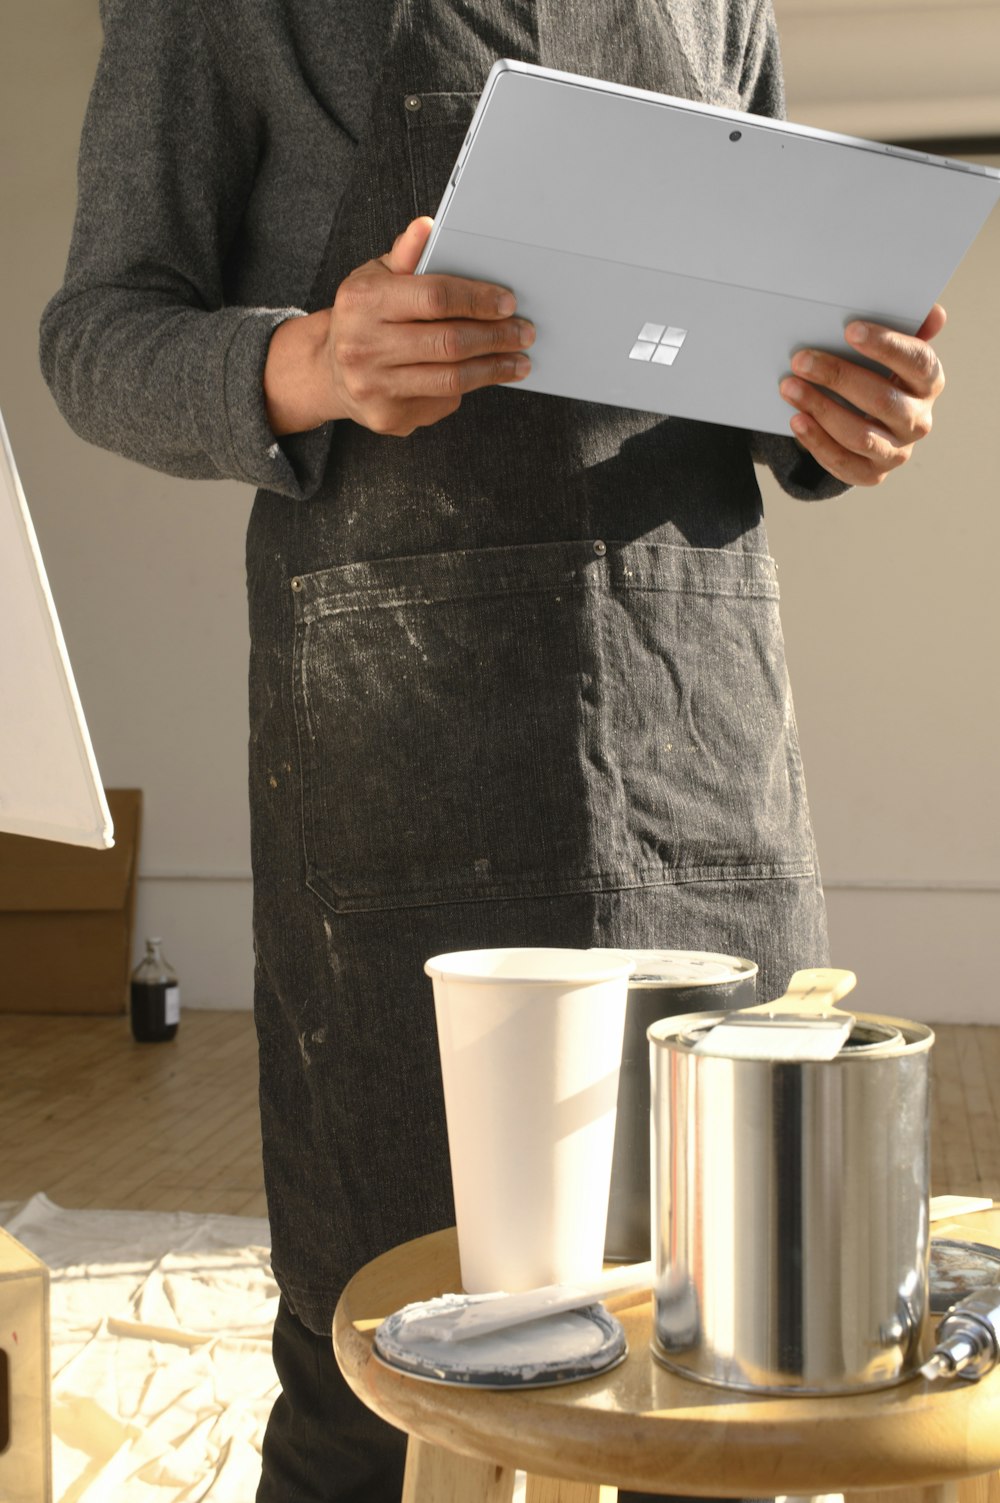 a man in an apron is holding a tablet